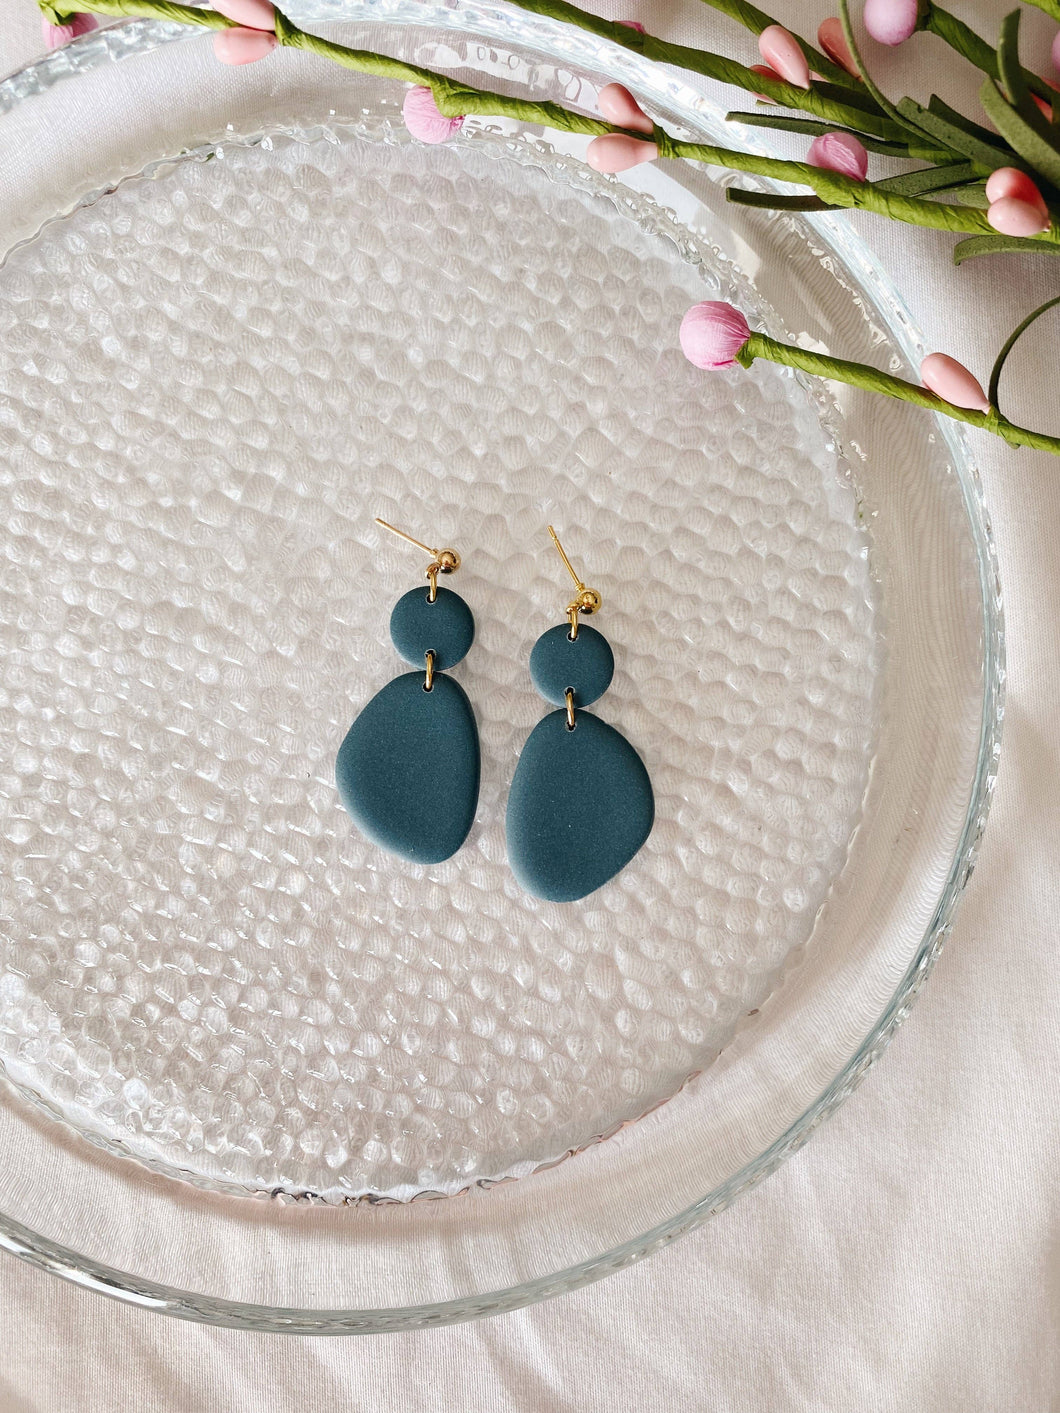 Selma - Spring Basics Collection - Hand Made Polymer Clay Earrings